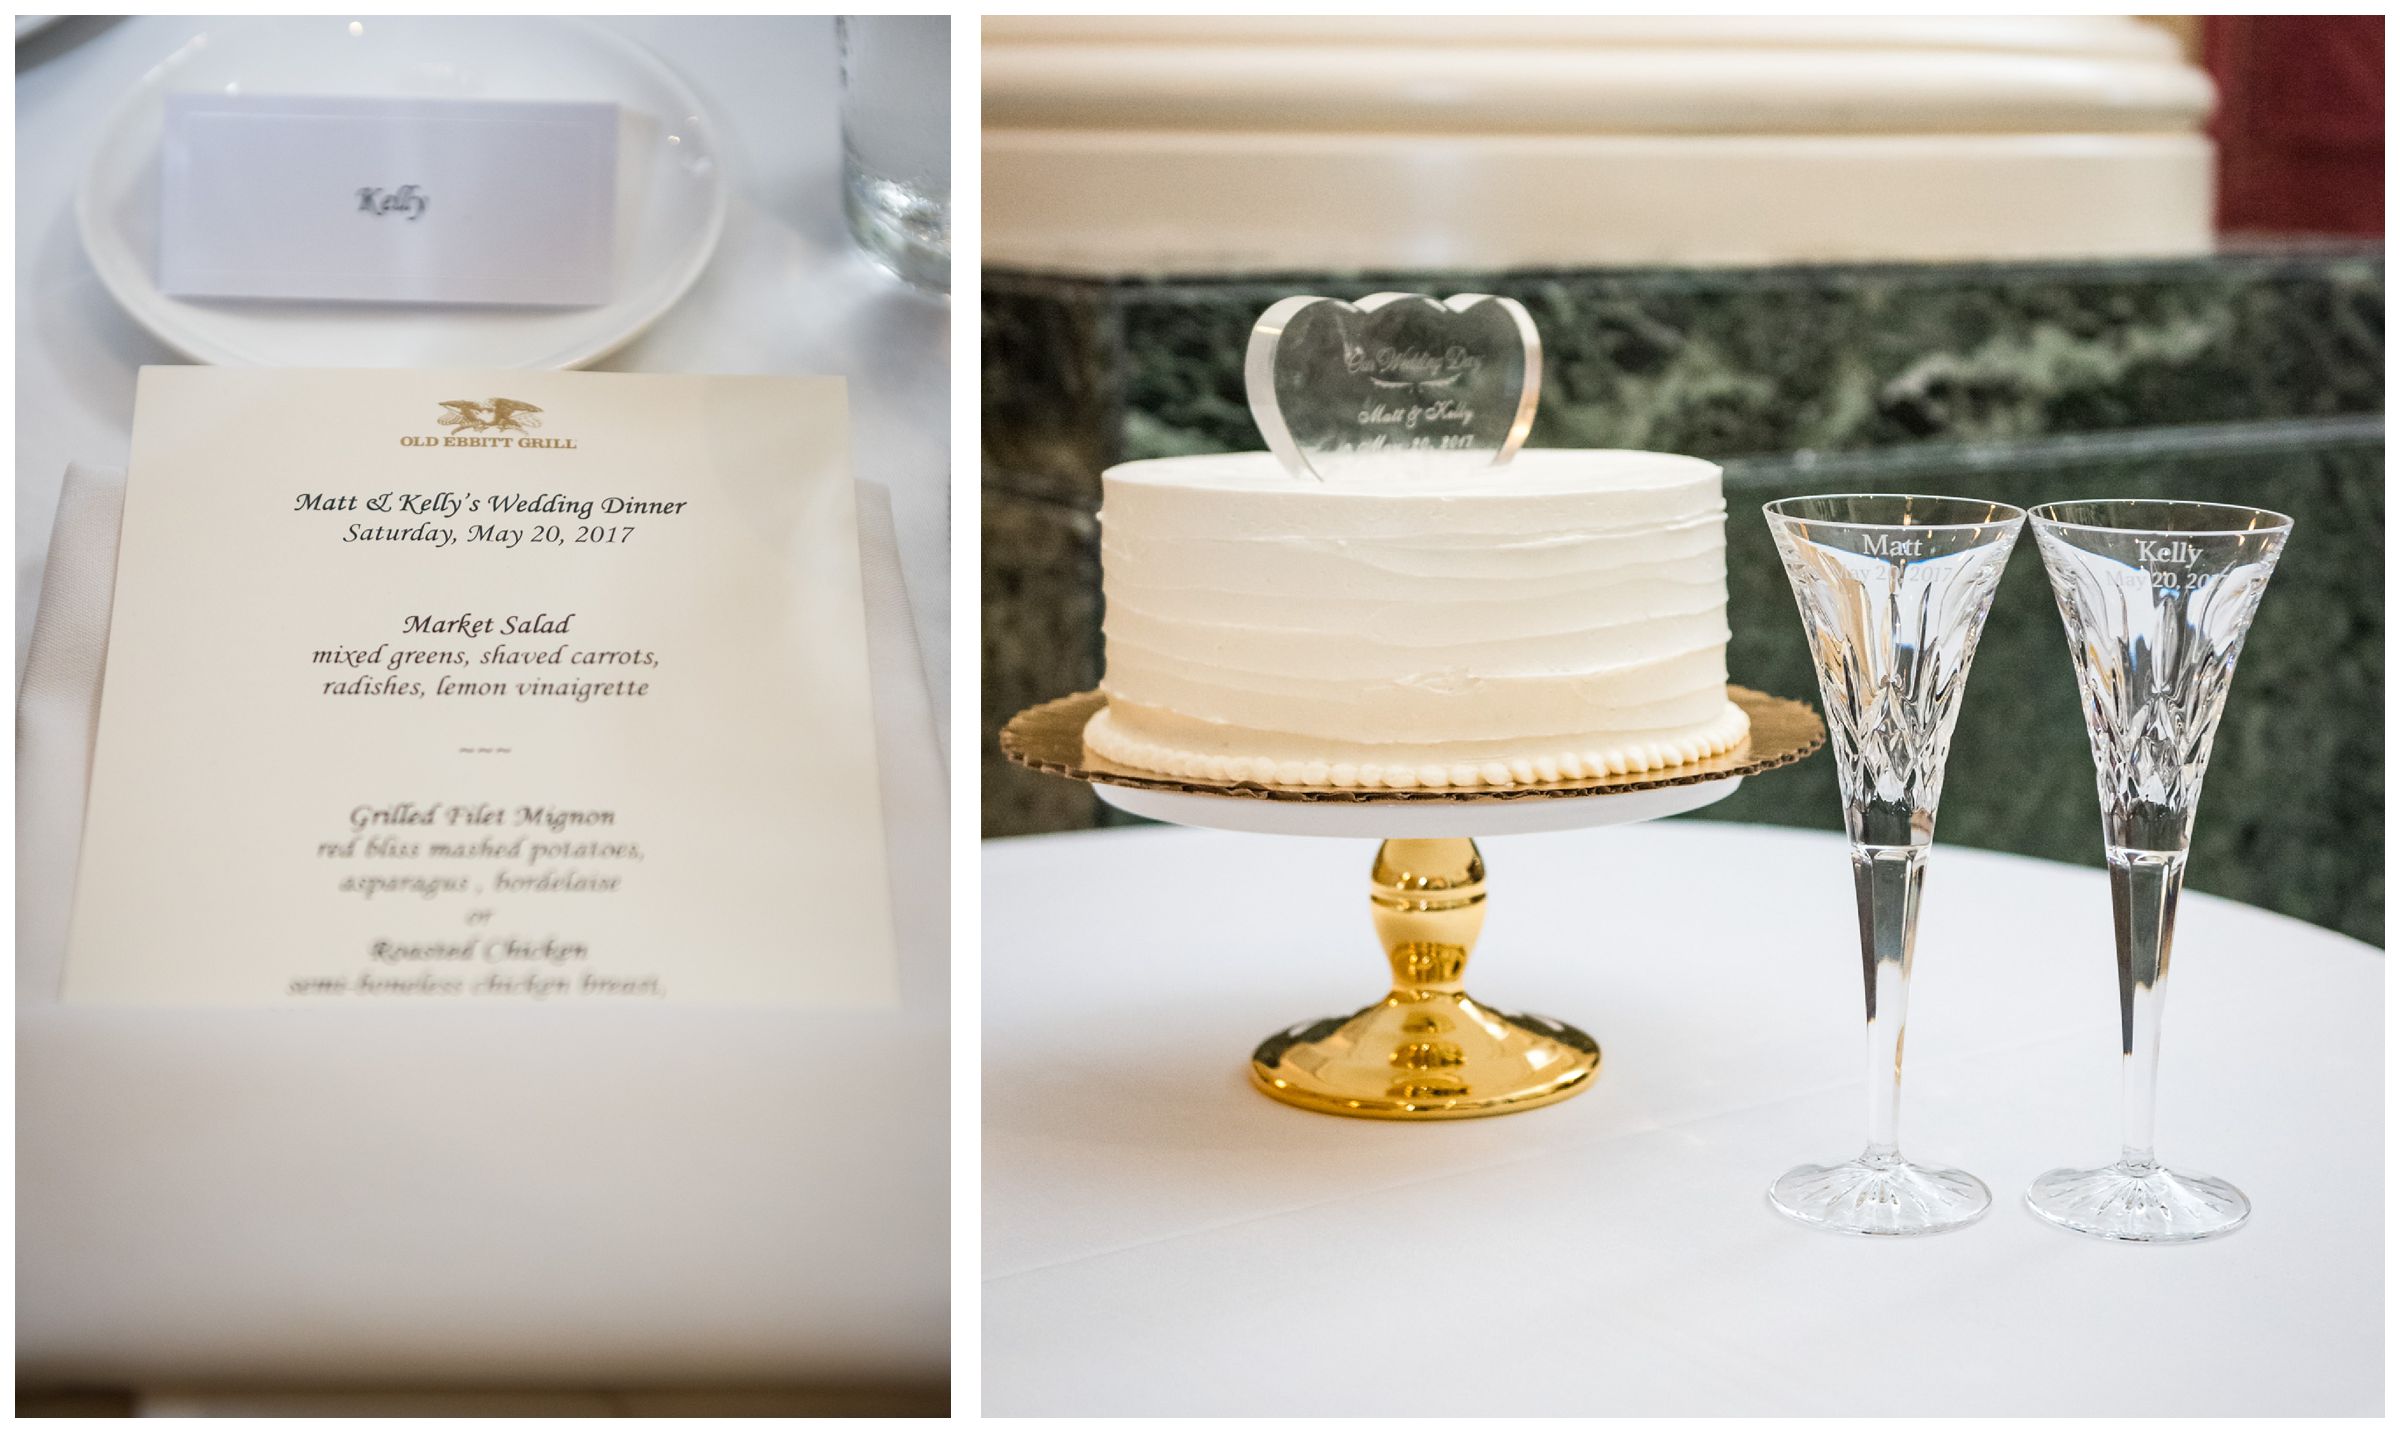 menu, cake with glass topper, and personalized champagne flutes during wedding reception dinner at Old Ebbitt Grill in Washington, D.C.